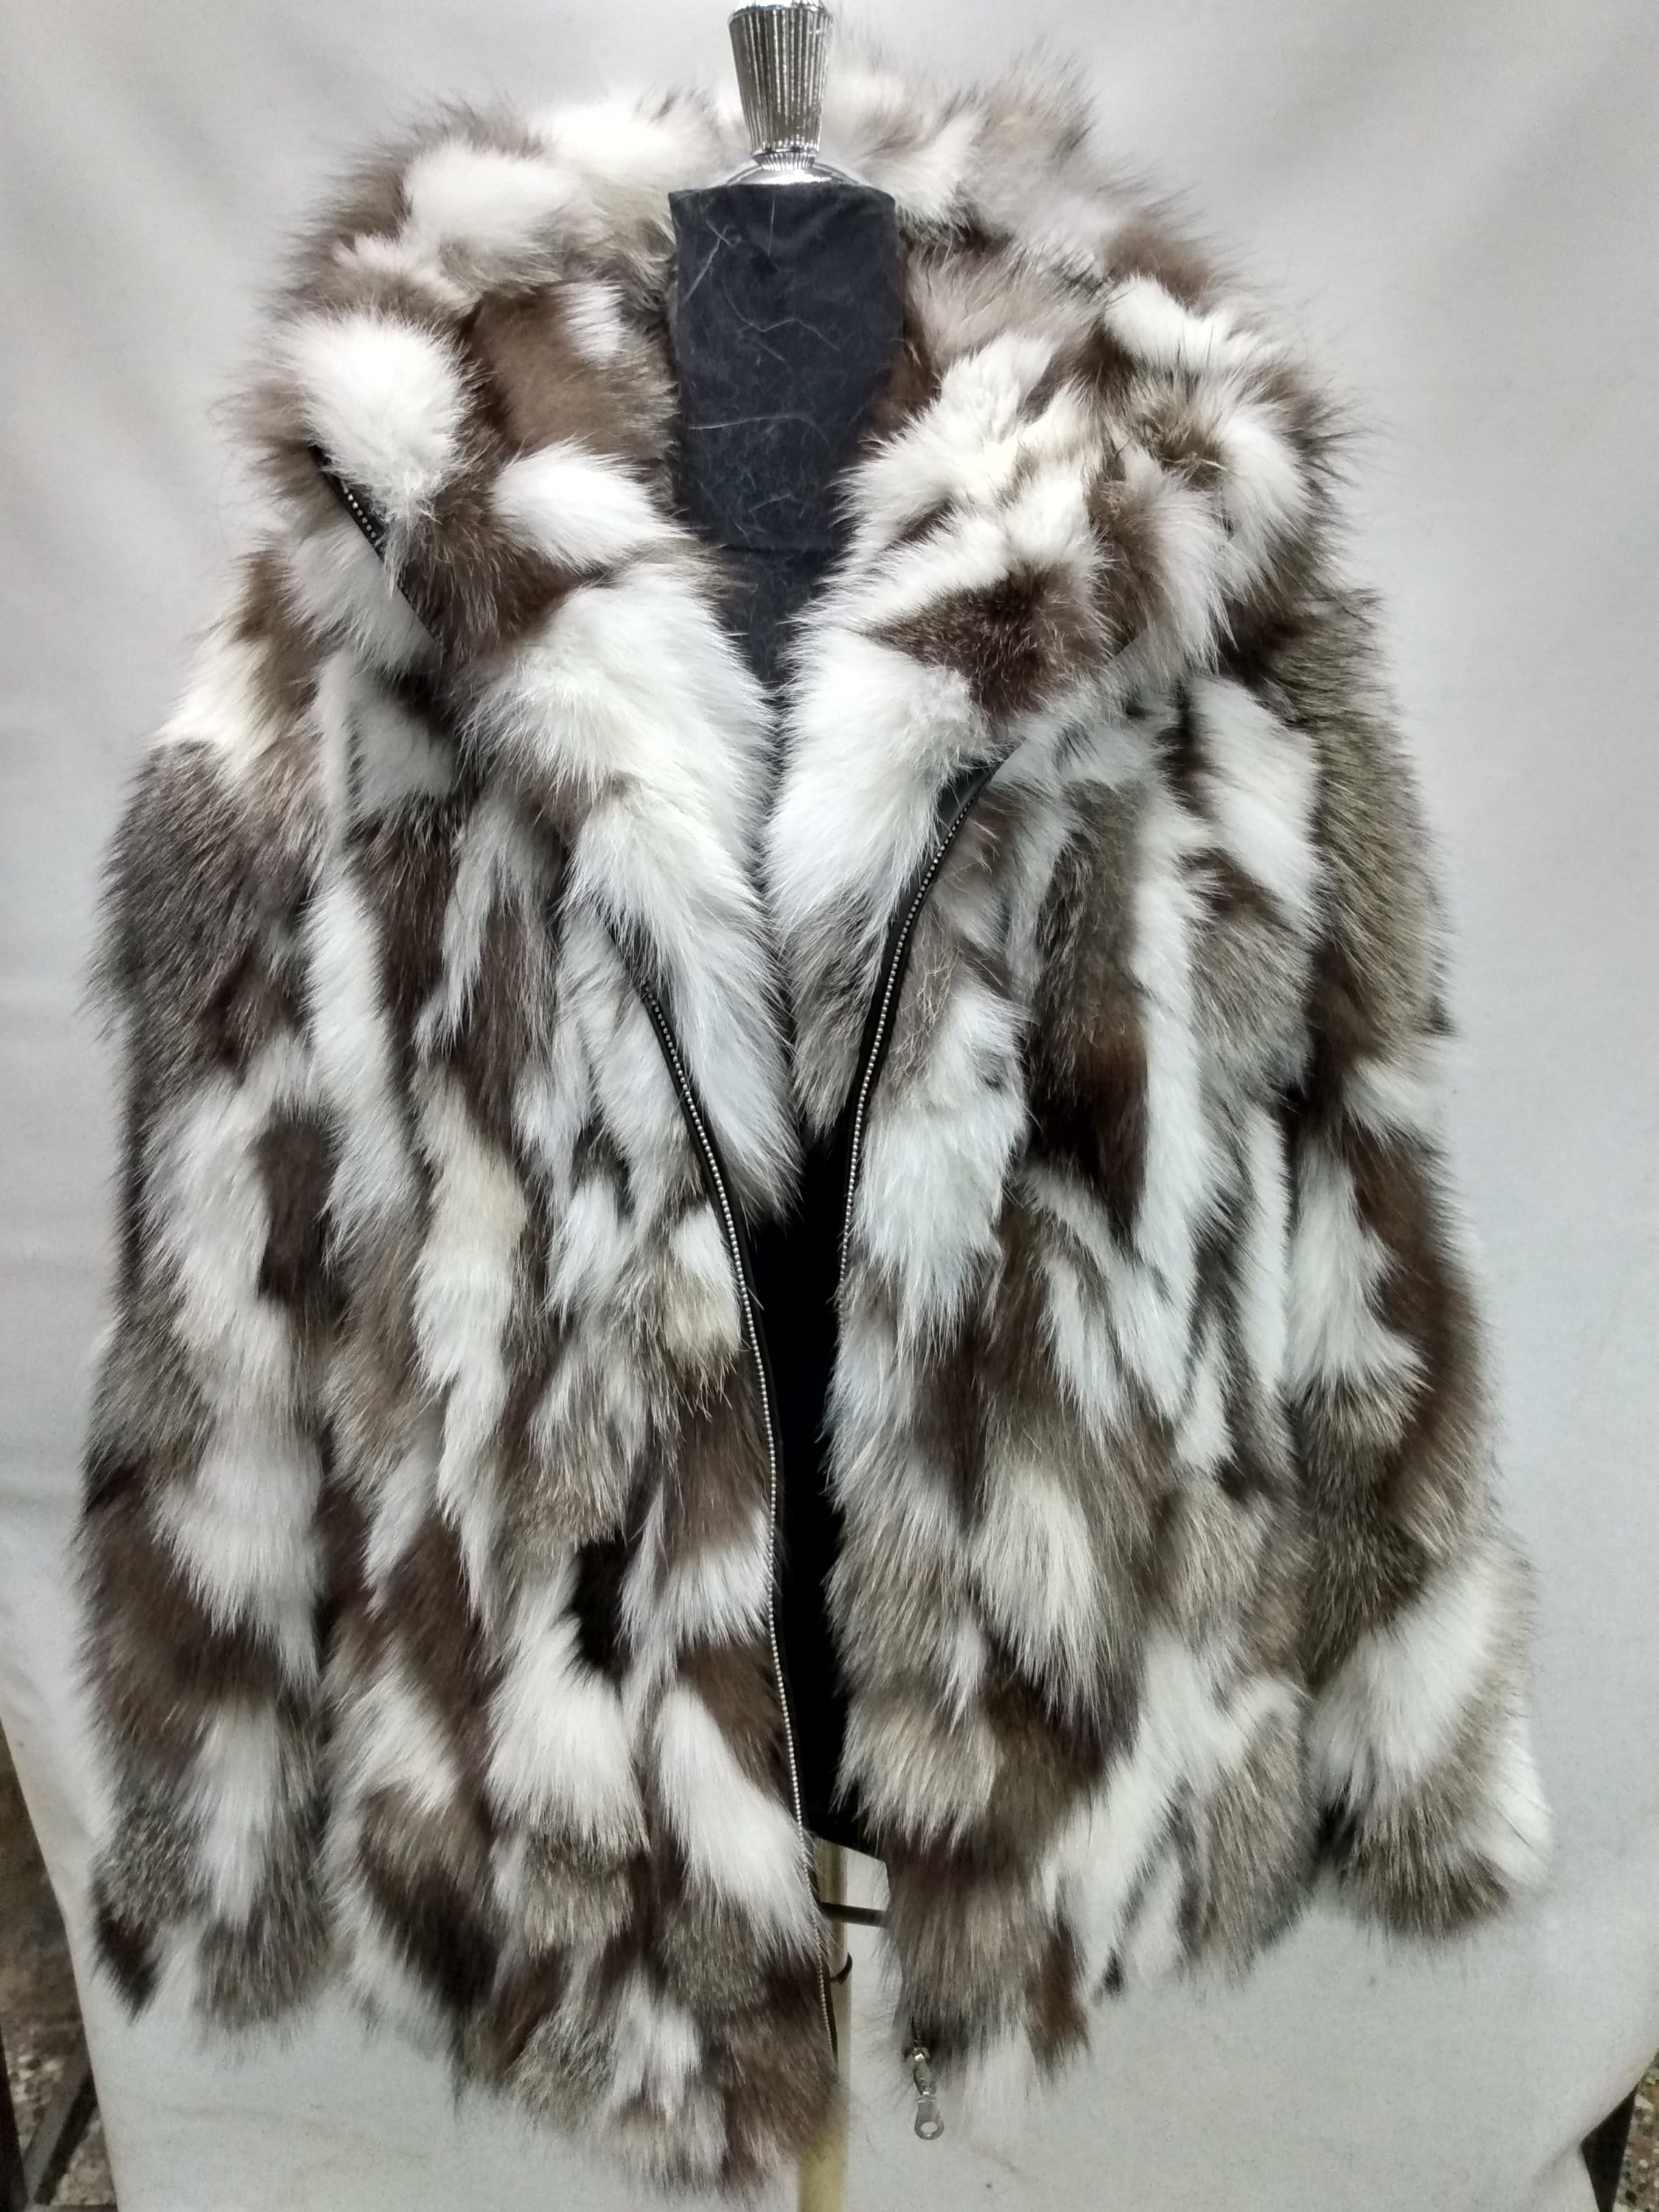 New Winter Men Real Fox Fur Coat With Hood Thick Warm X-Long Natural Fur  Outwear